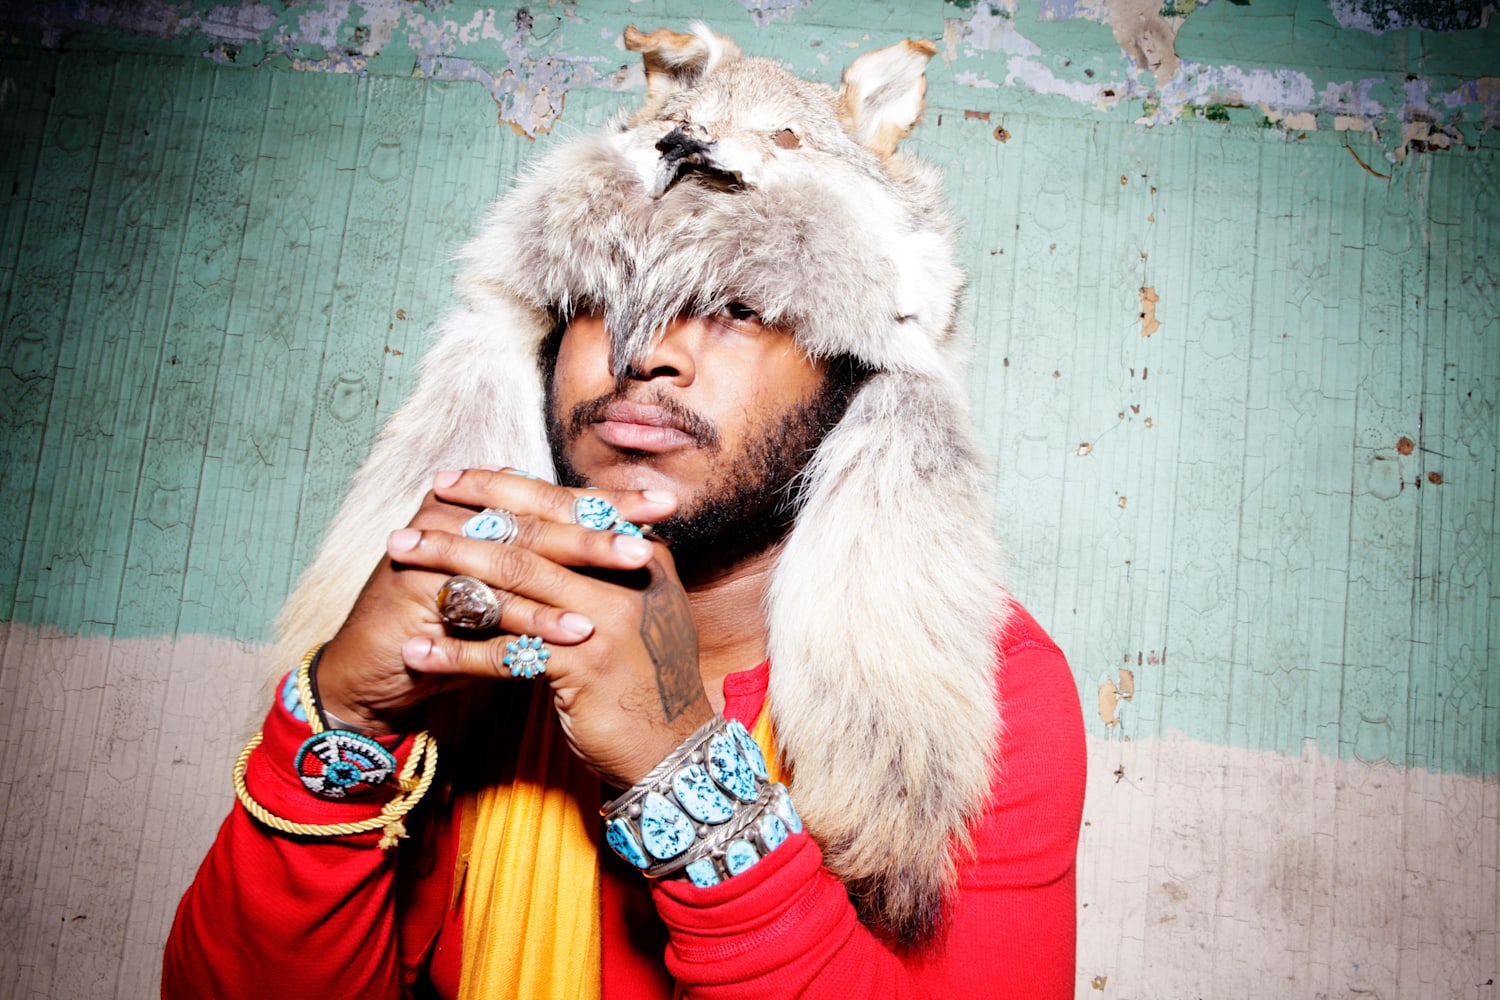 How Thundercat Fell in Love With Video Game Music